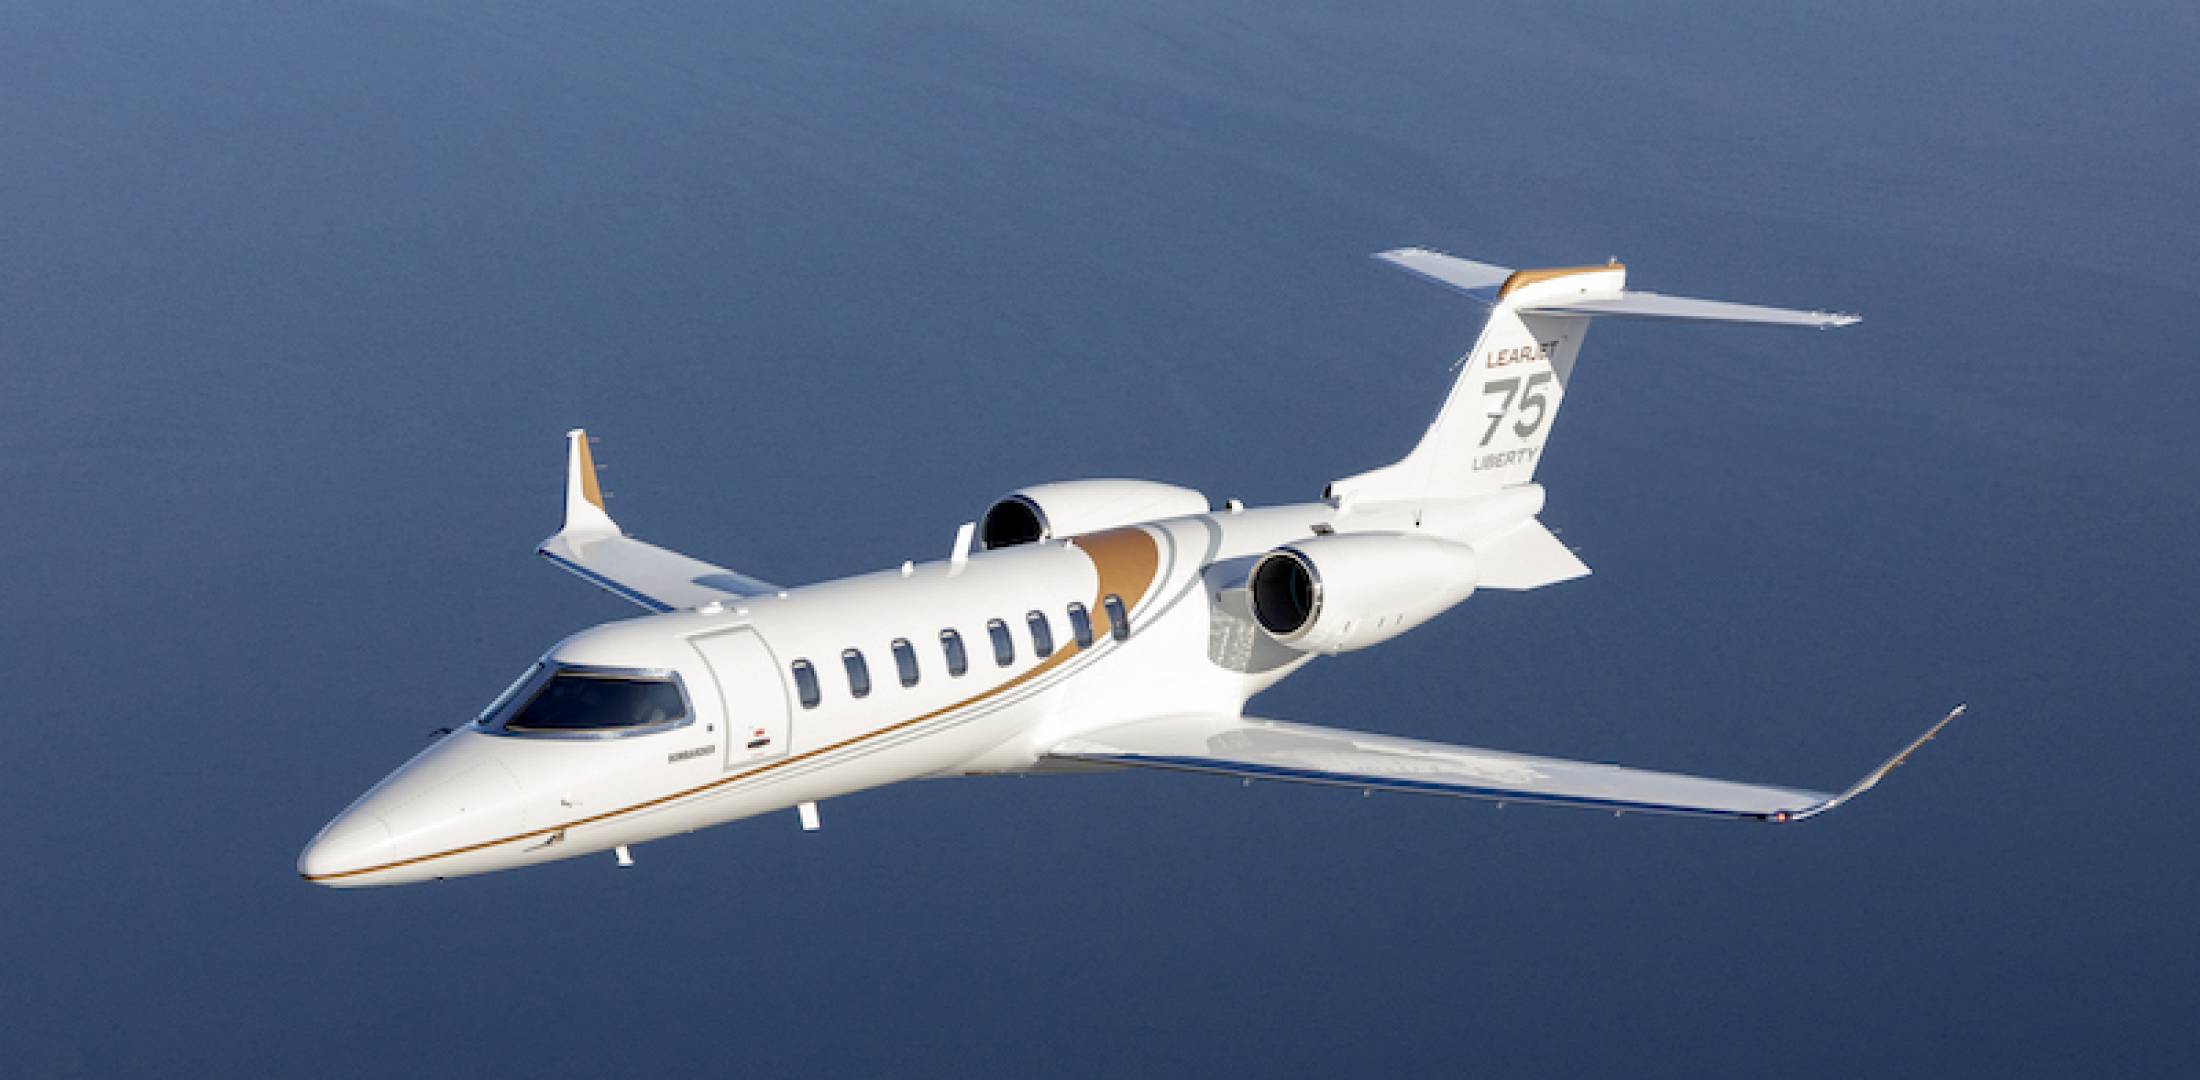 A PICTURE OF THE NEW LEARJET 75 LIBERTY AIRCRAFT